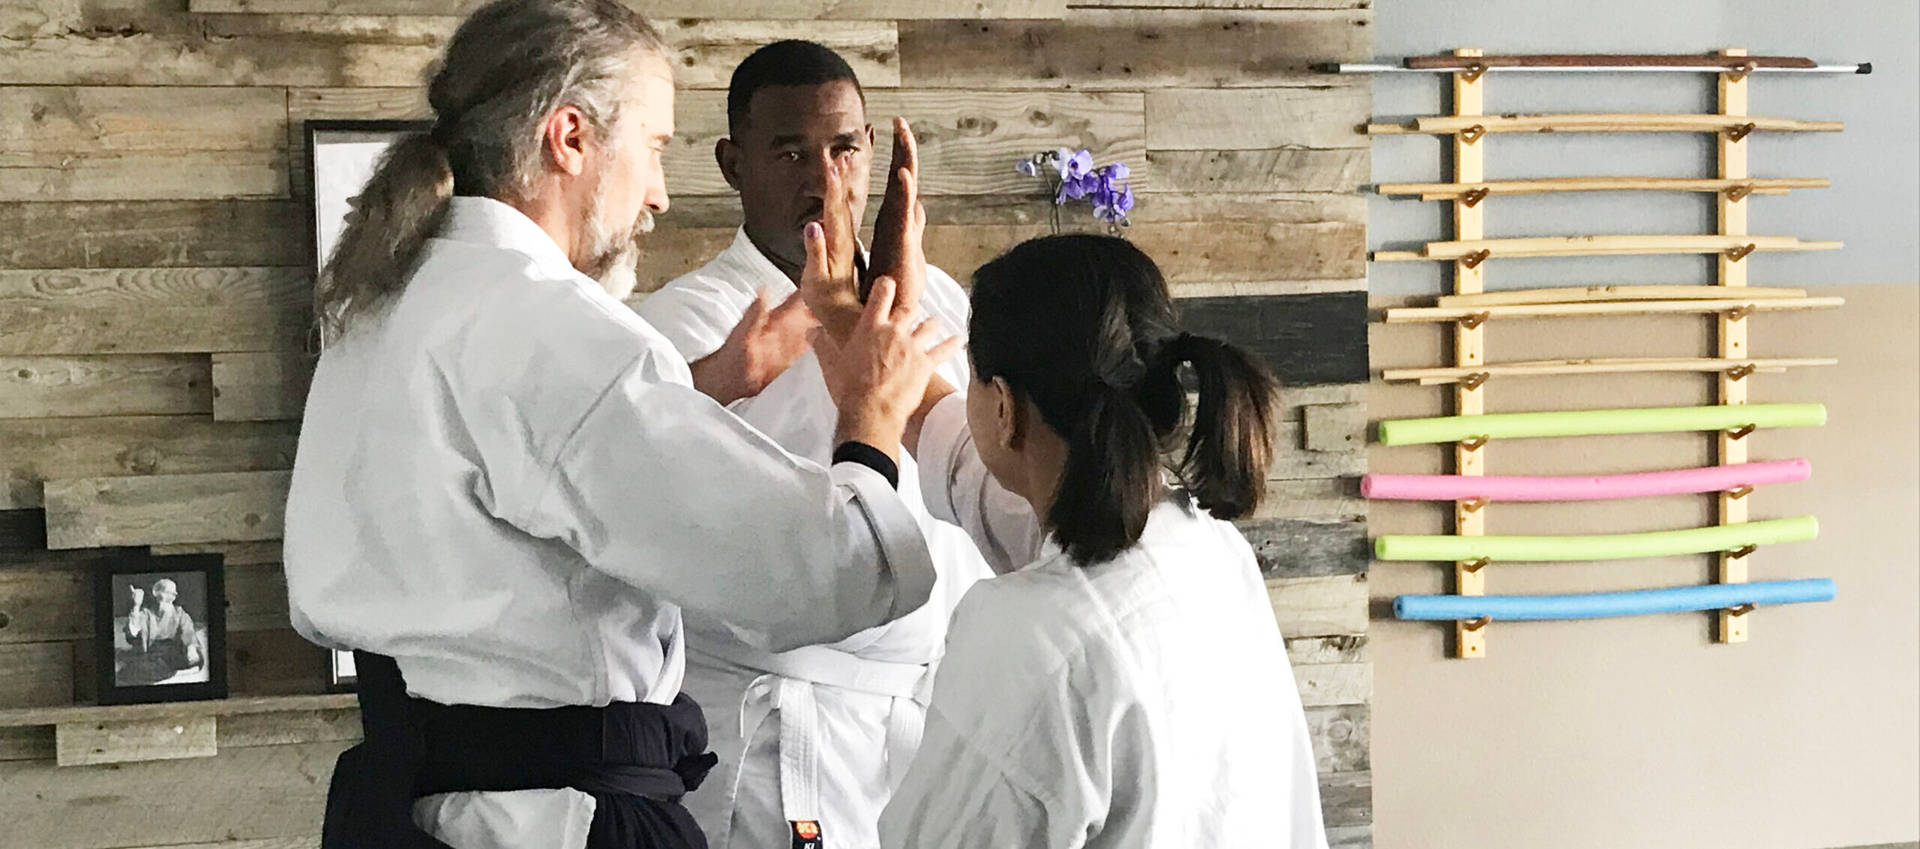 An Aikido instructor demonstrating Nikyo techniques. Wallpaper